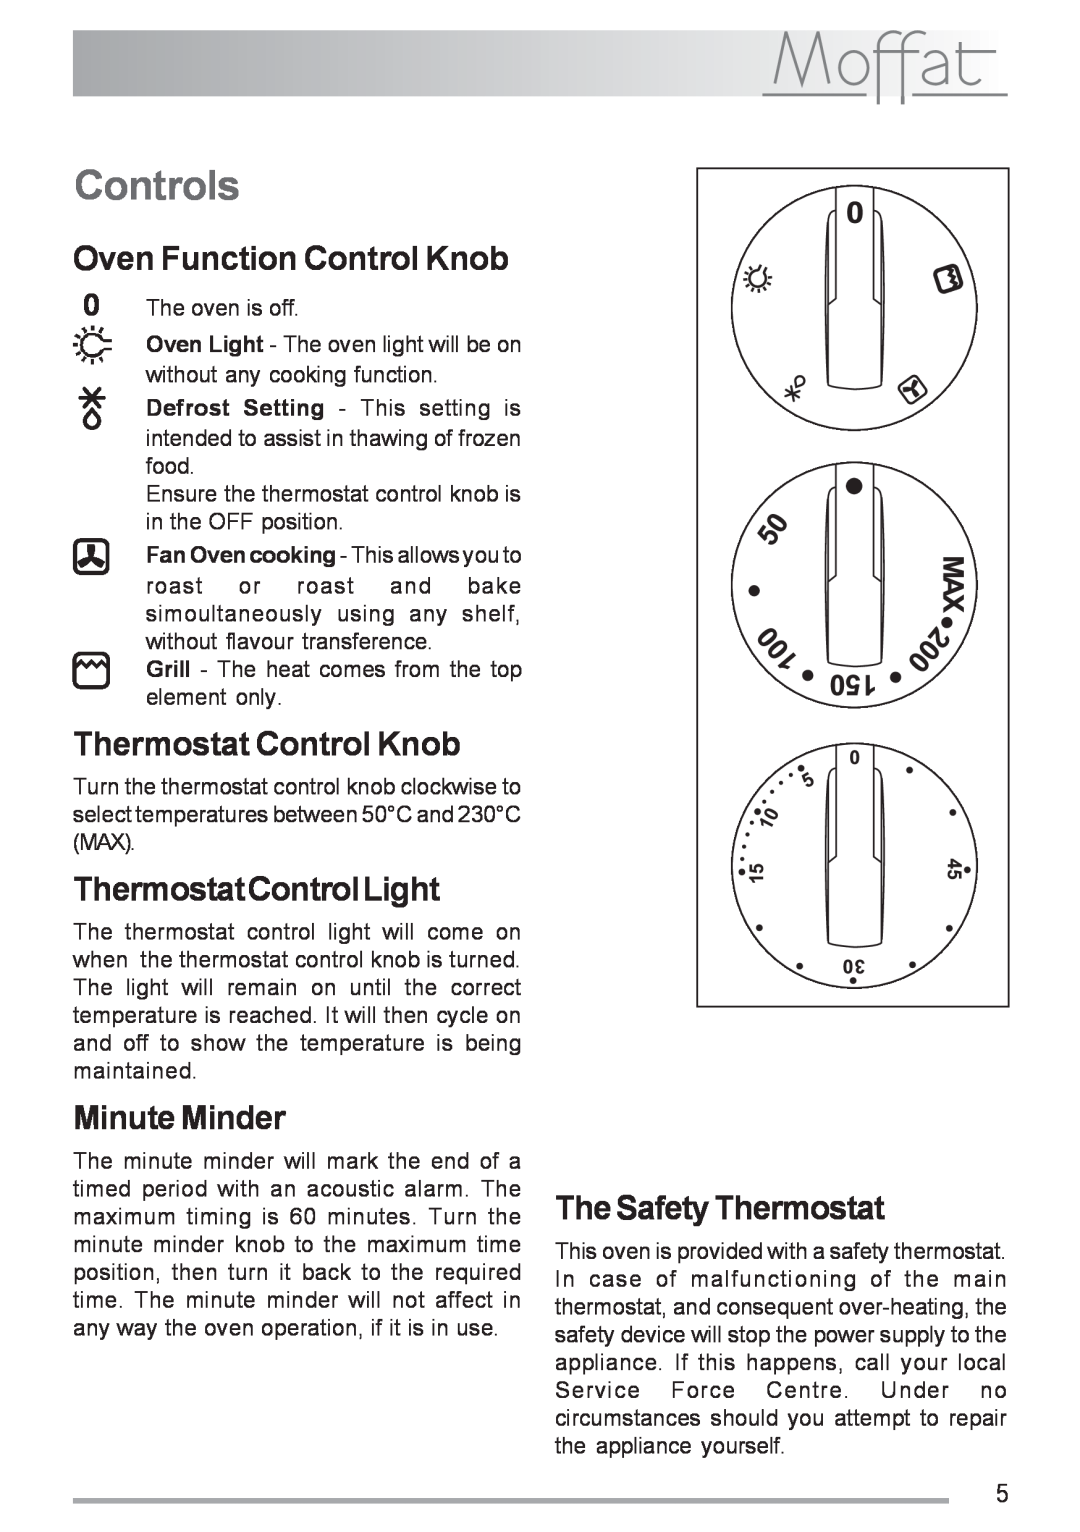 Moffat MSF 611 manual Controls, Oven Function Control Knob, Thermostat Control Knob, ThermostatControlLight, Minute Minder 